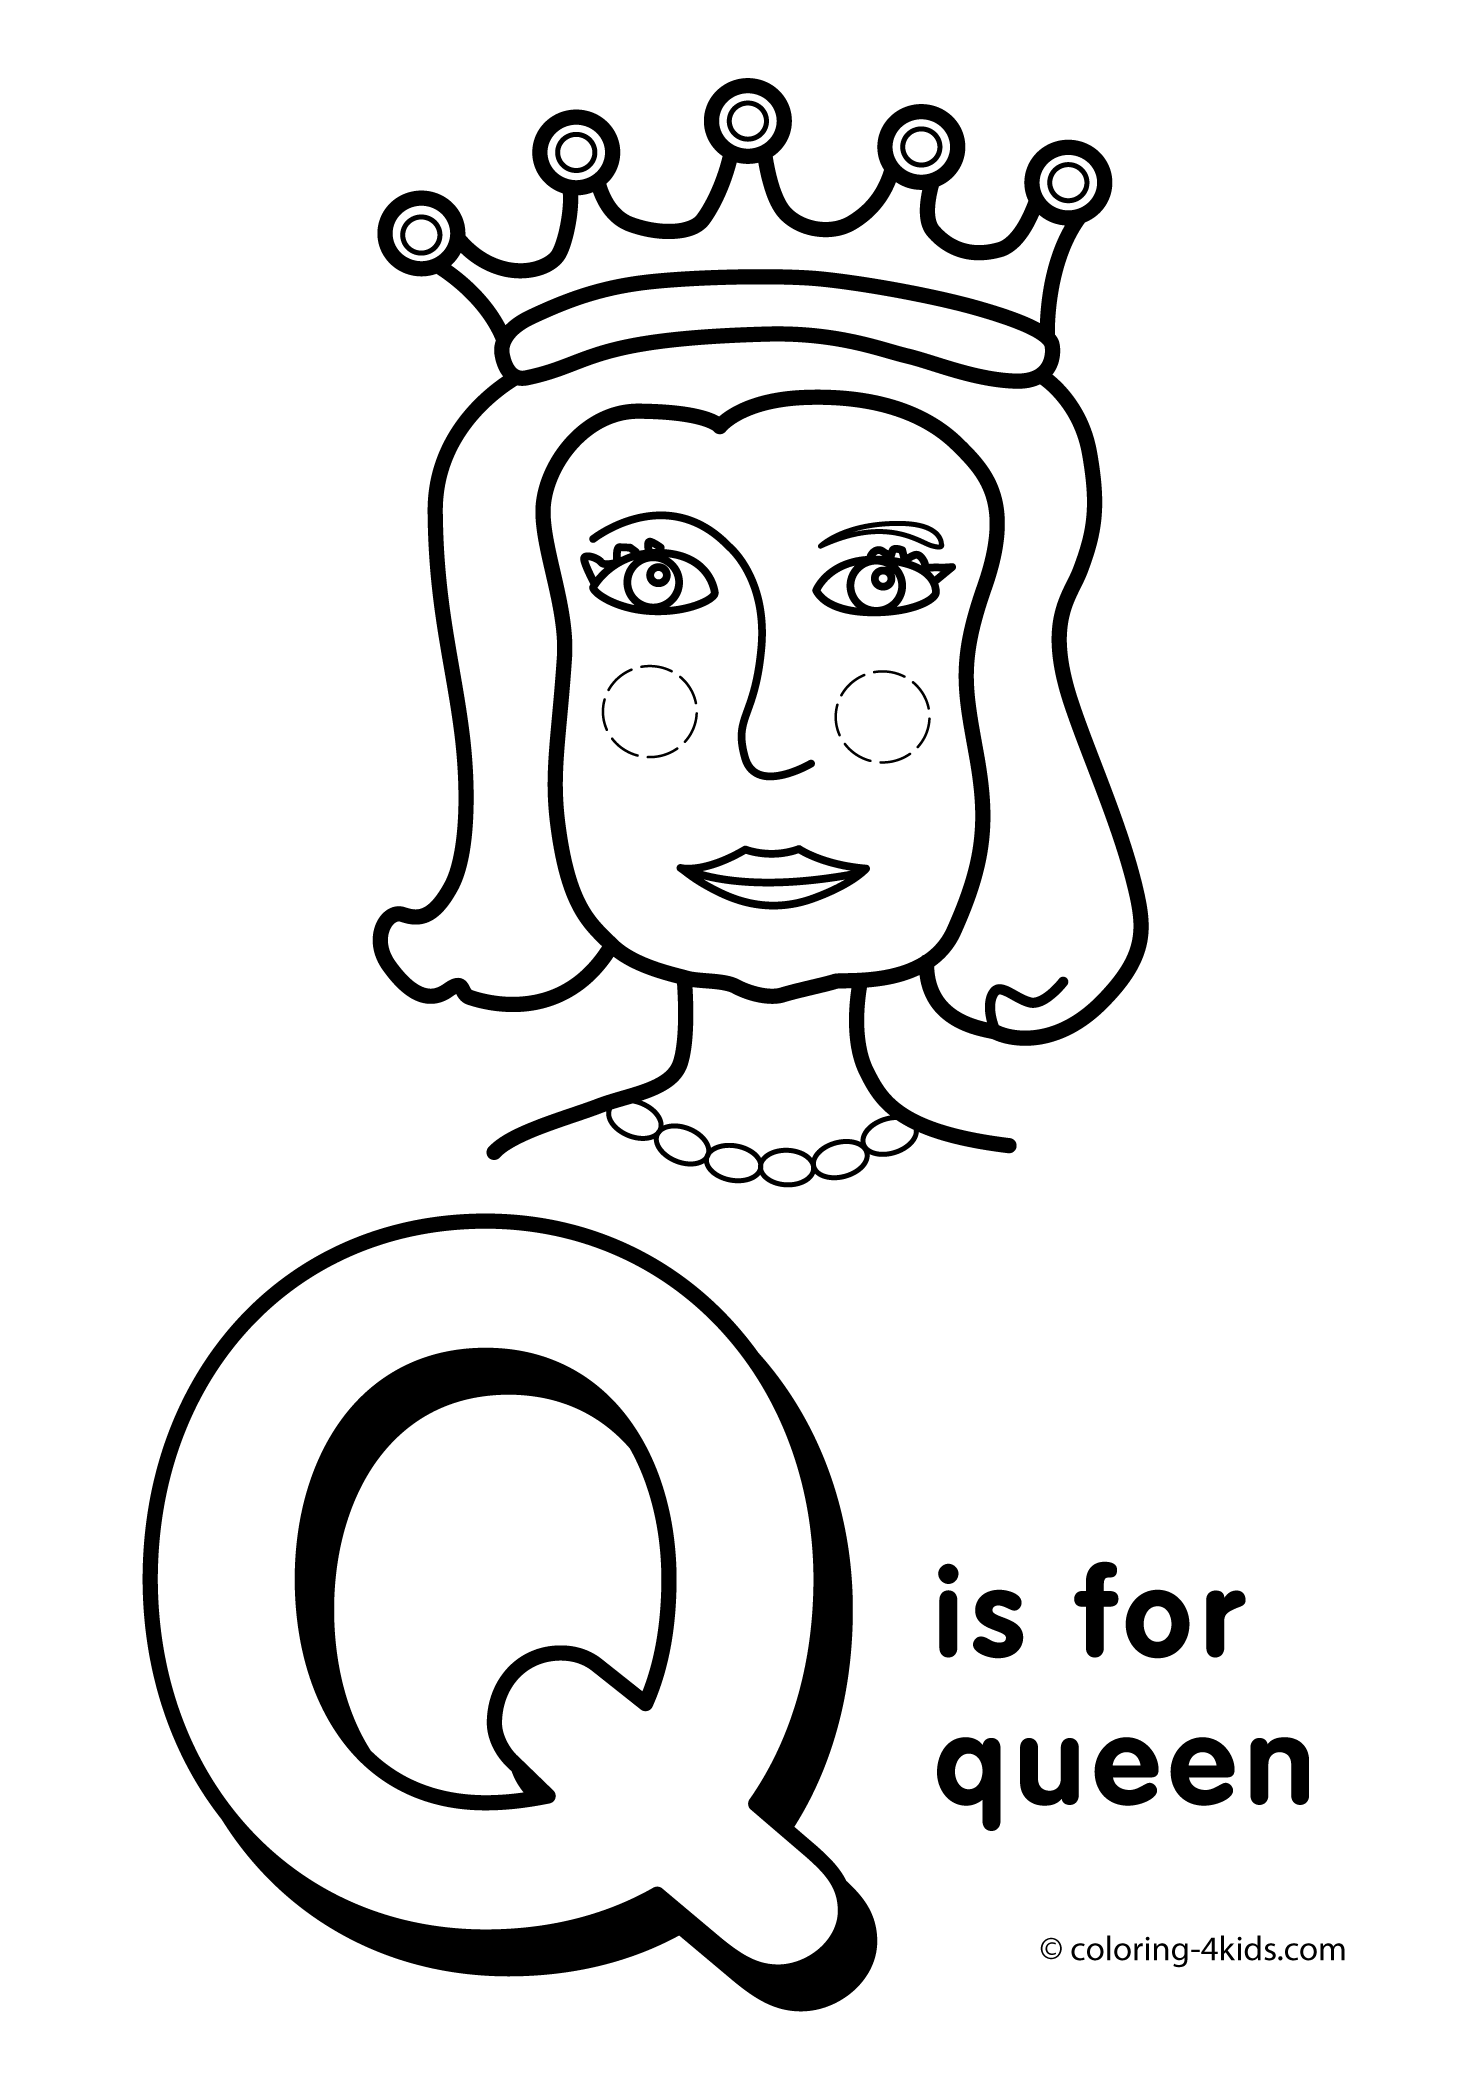 Coloring Pages Letter Q - Coloring Home